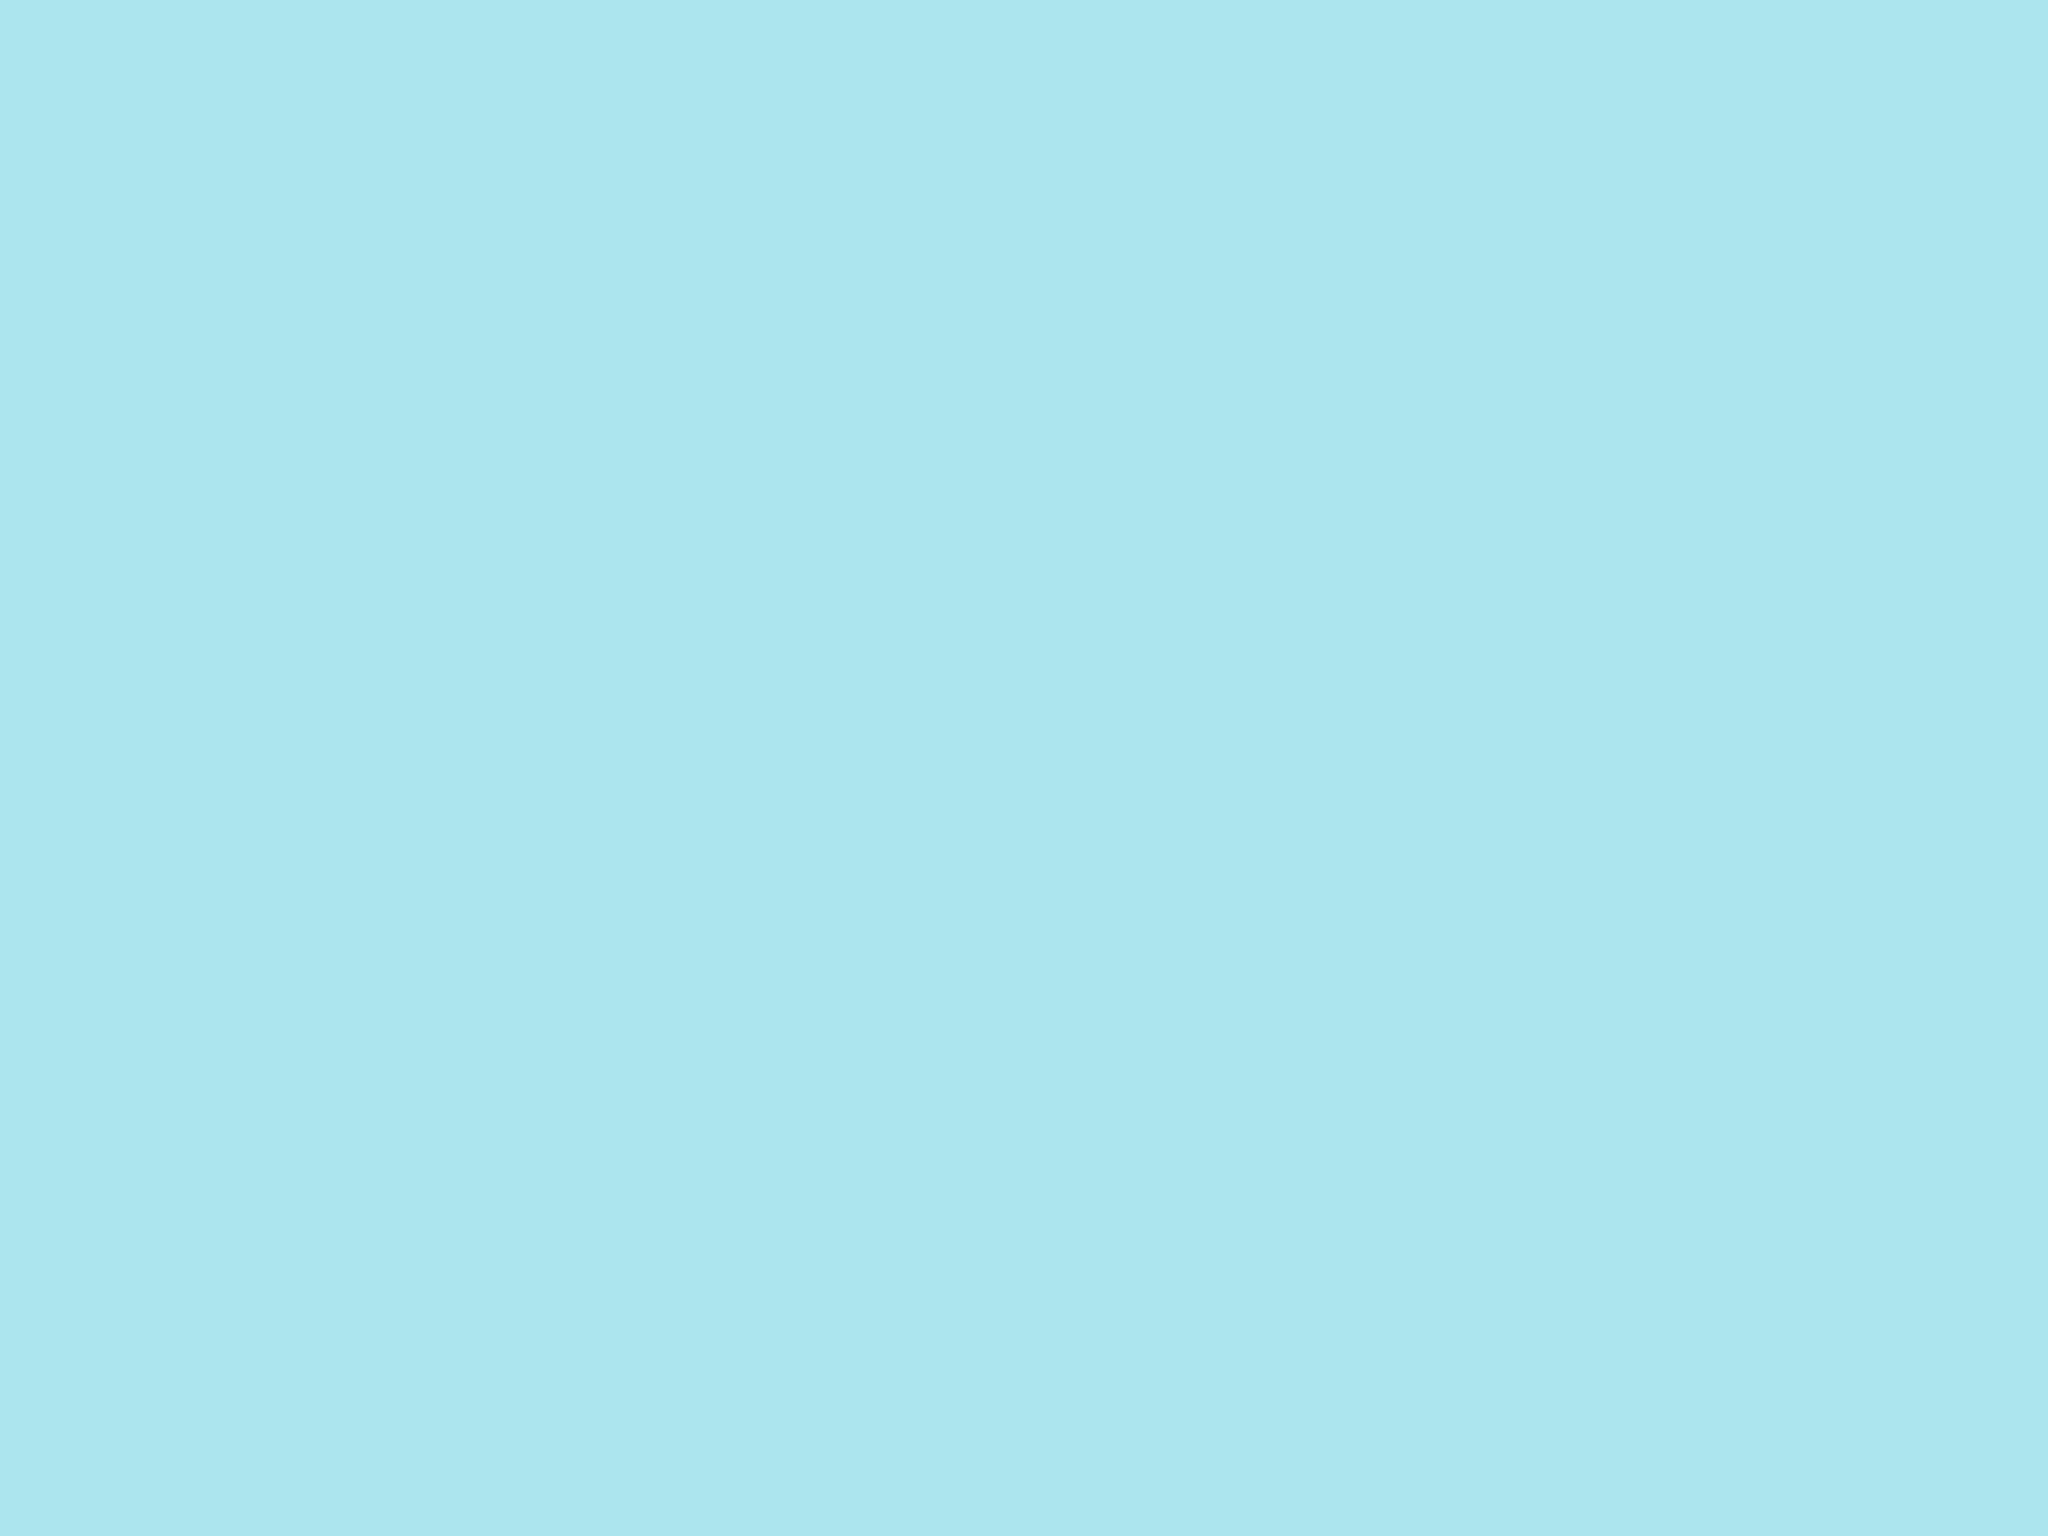 2048x1536 Blizzard Blue Solid Color Background